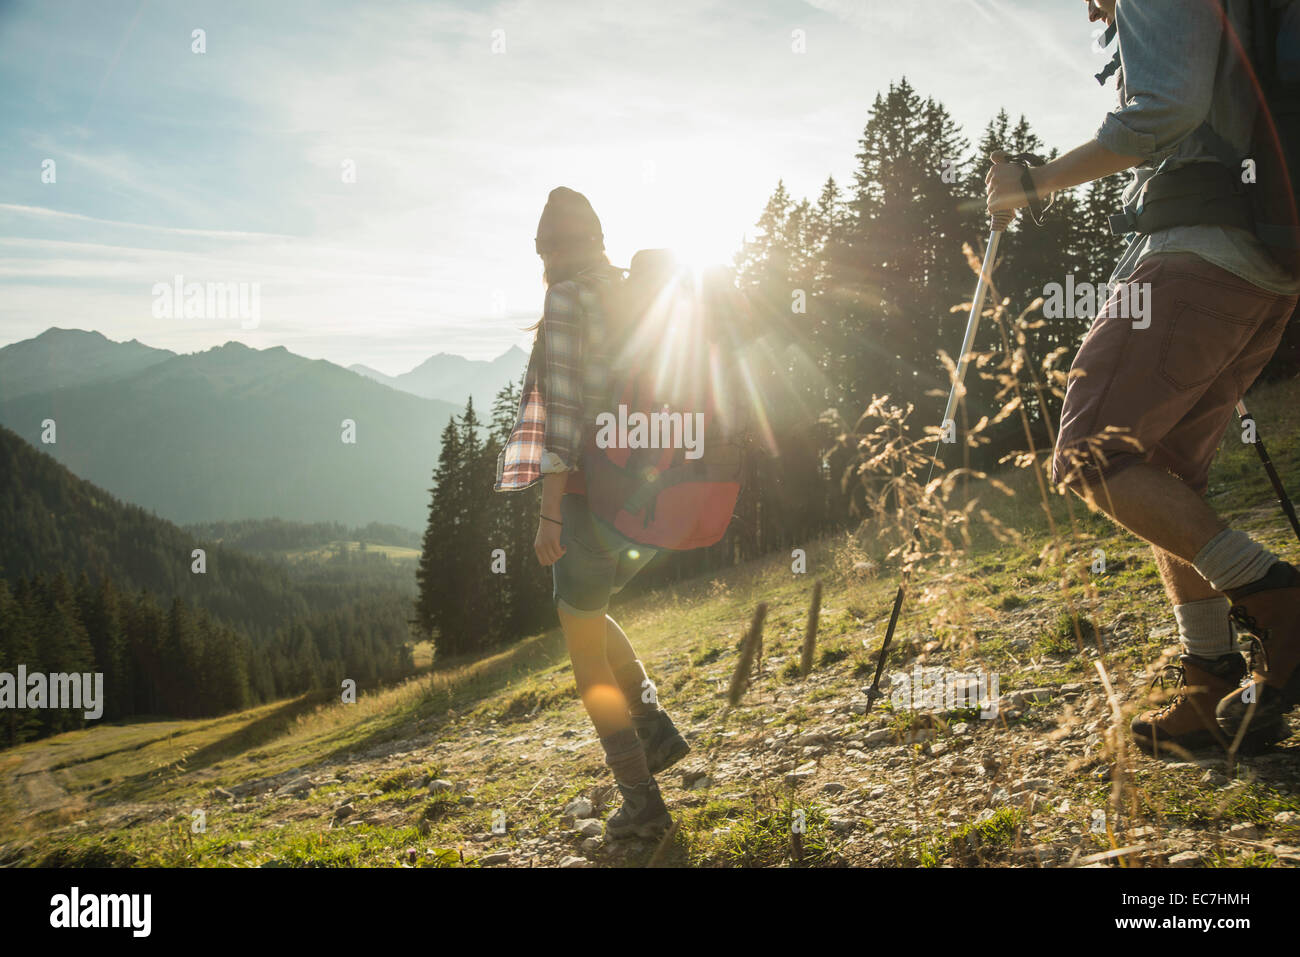 Austria, Tyrol, Tannheimer Tal, young couple hiking in sunlight on alpine meadow Stock Photo